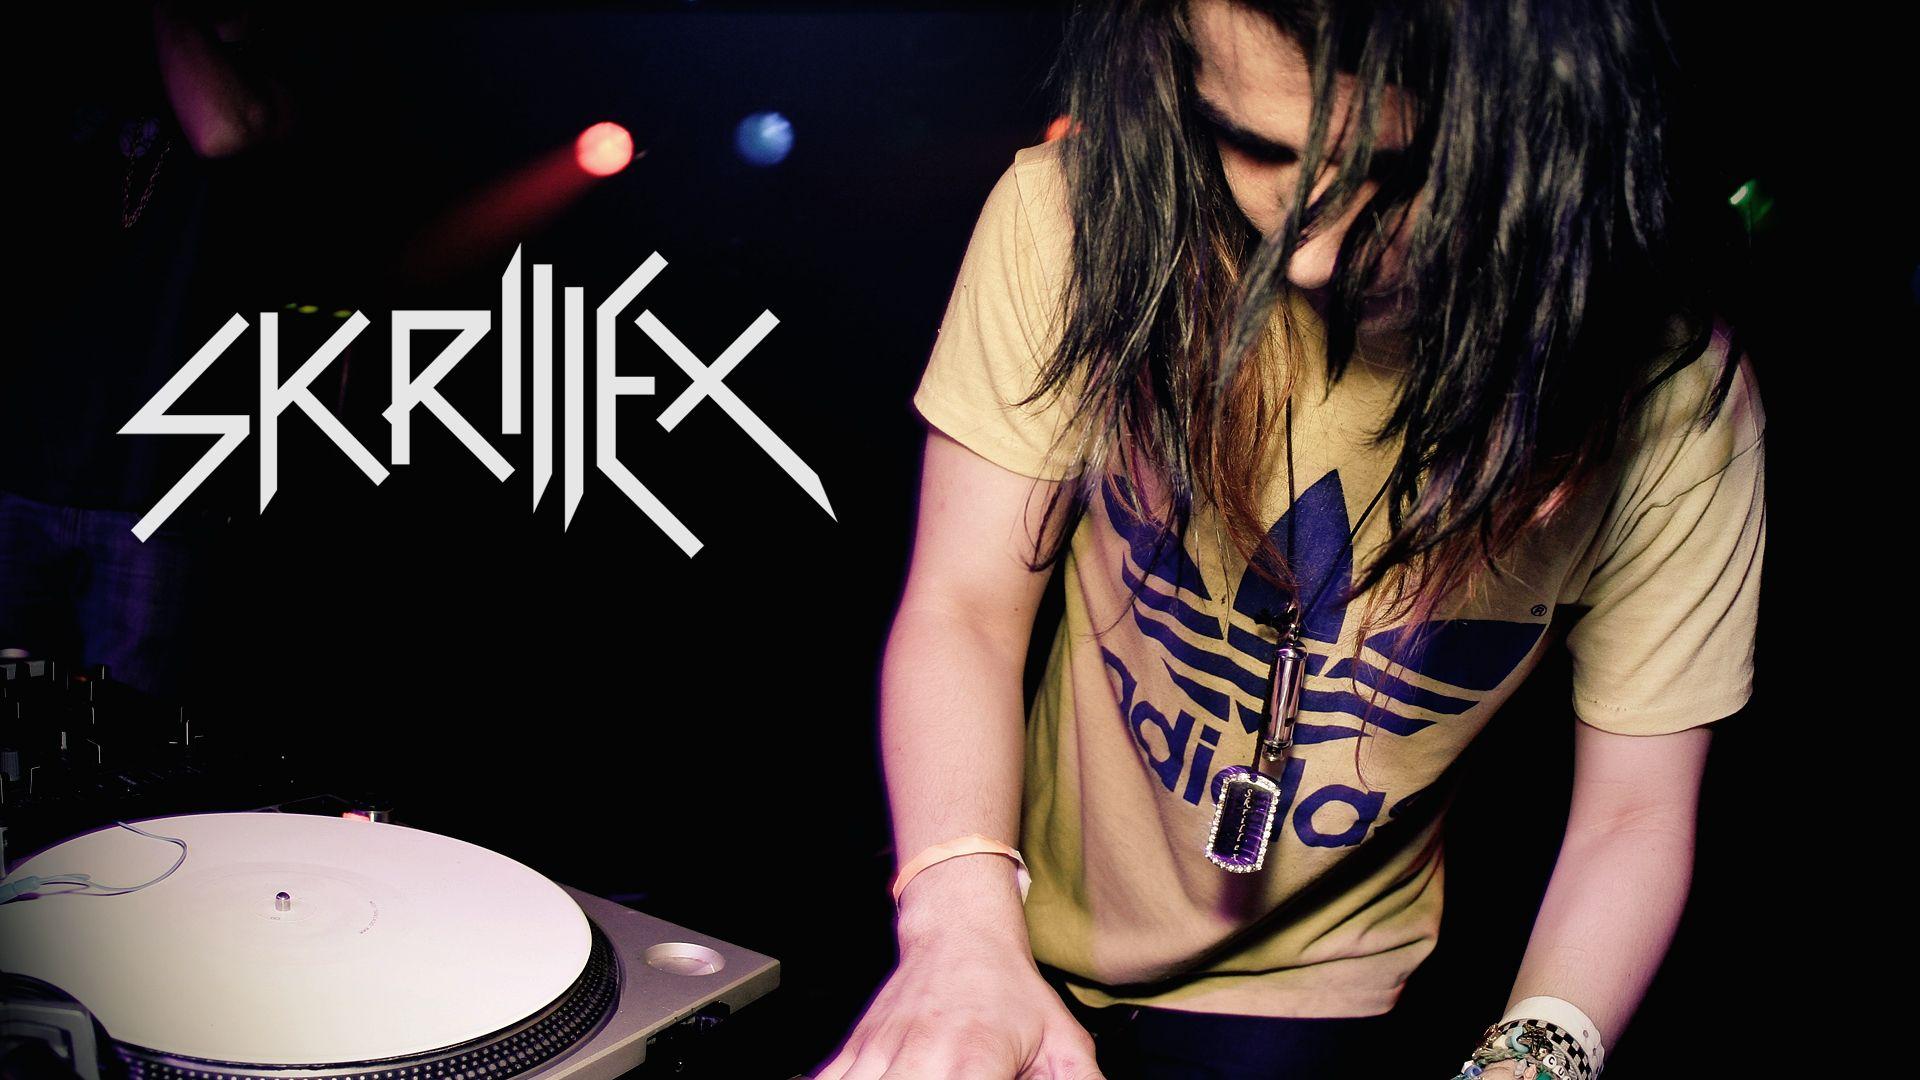 Skrillex in the adidas yellow t shirt wallpaper and image